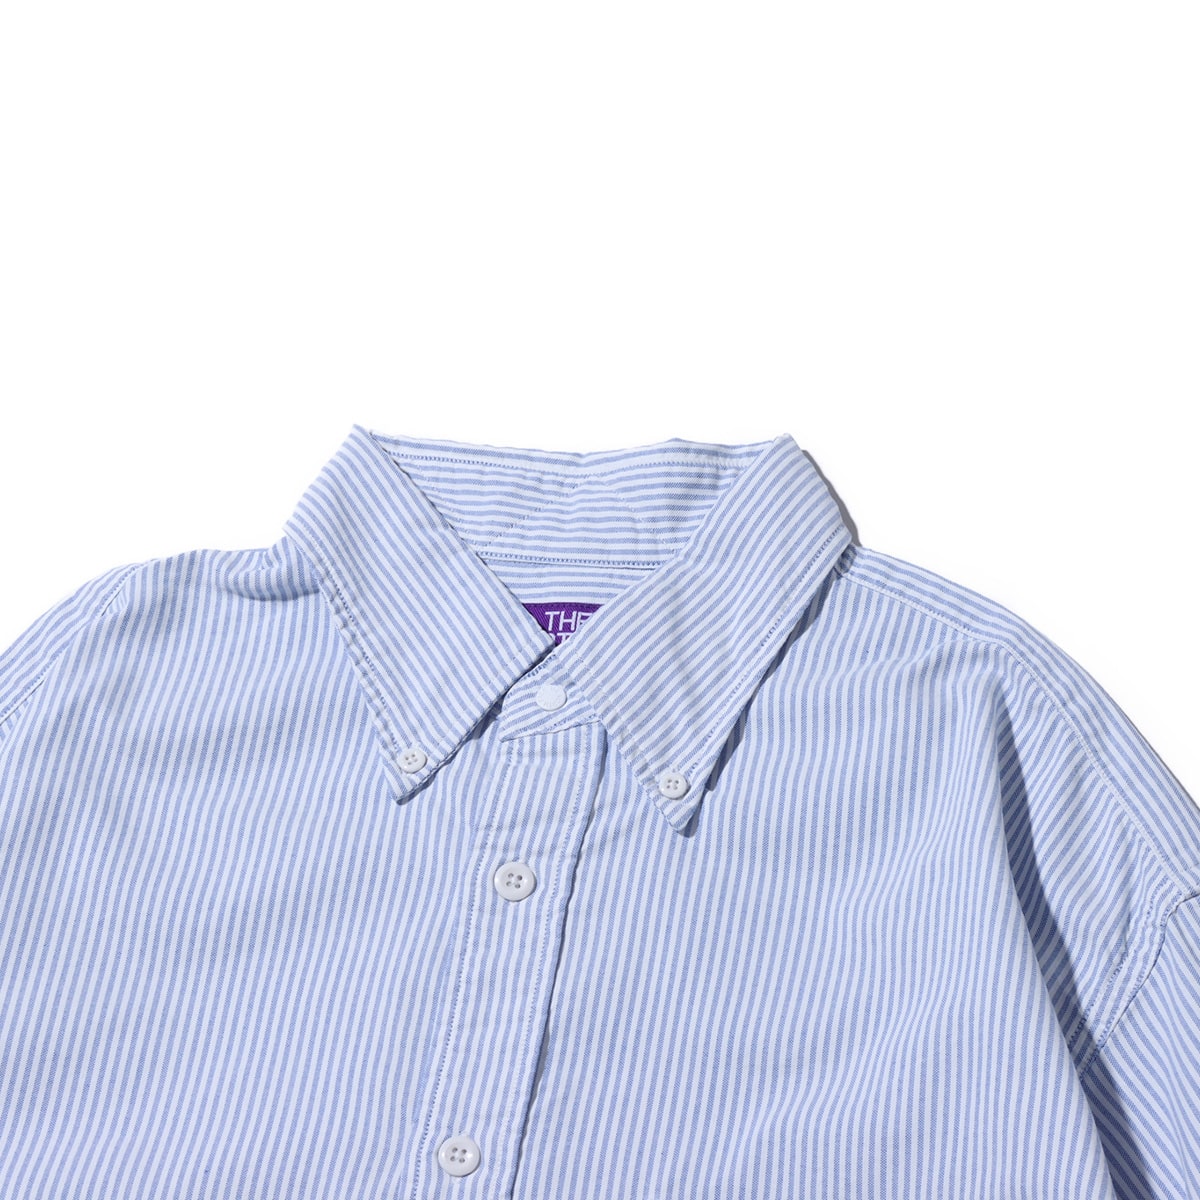 THE NORTH FACE PURPLE LABEL Button Down Striped Field Shirt Sax 24SS-I